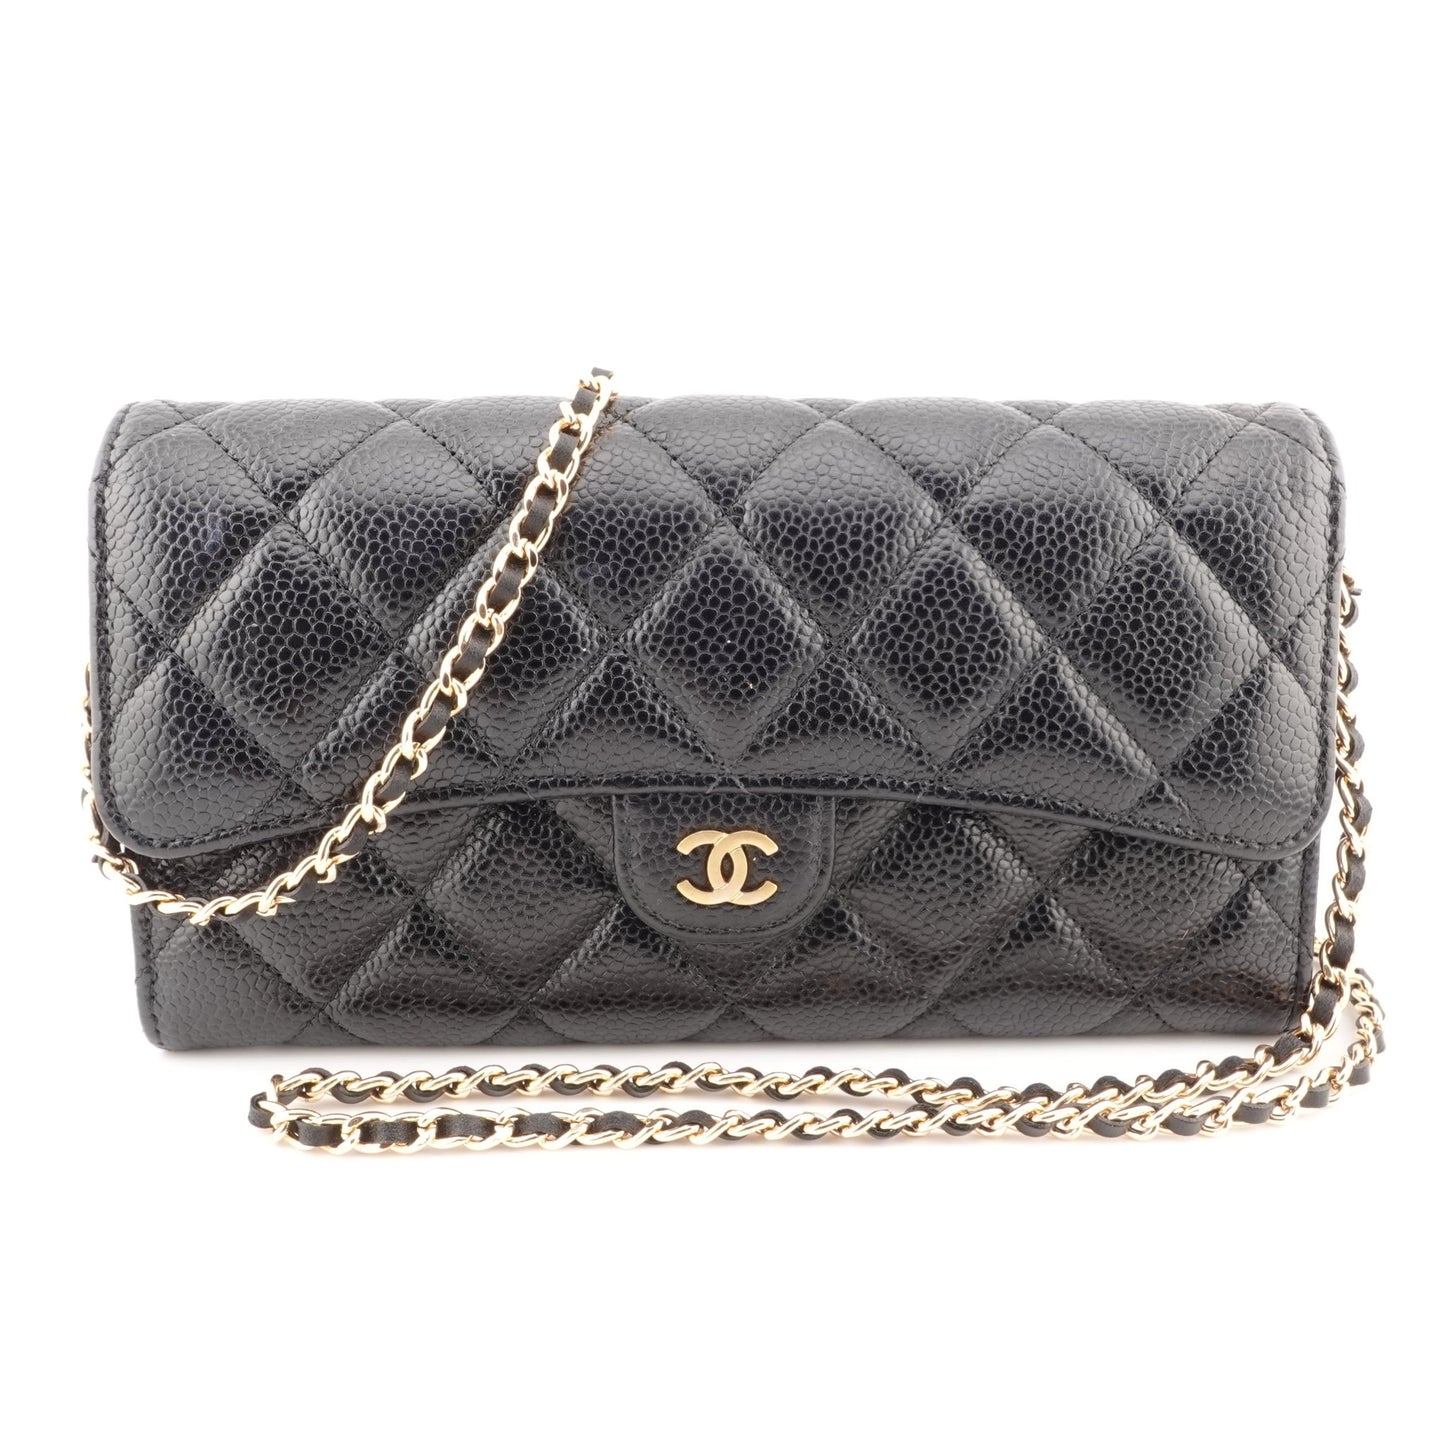 CHANEL Caviar Classic Flap Gusseted Wallet on Chain - Bag Envy